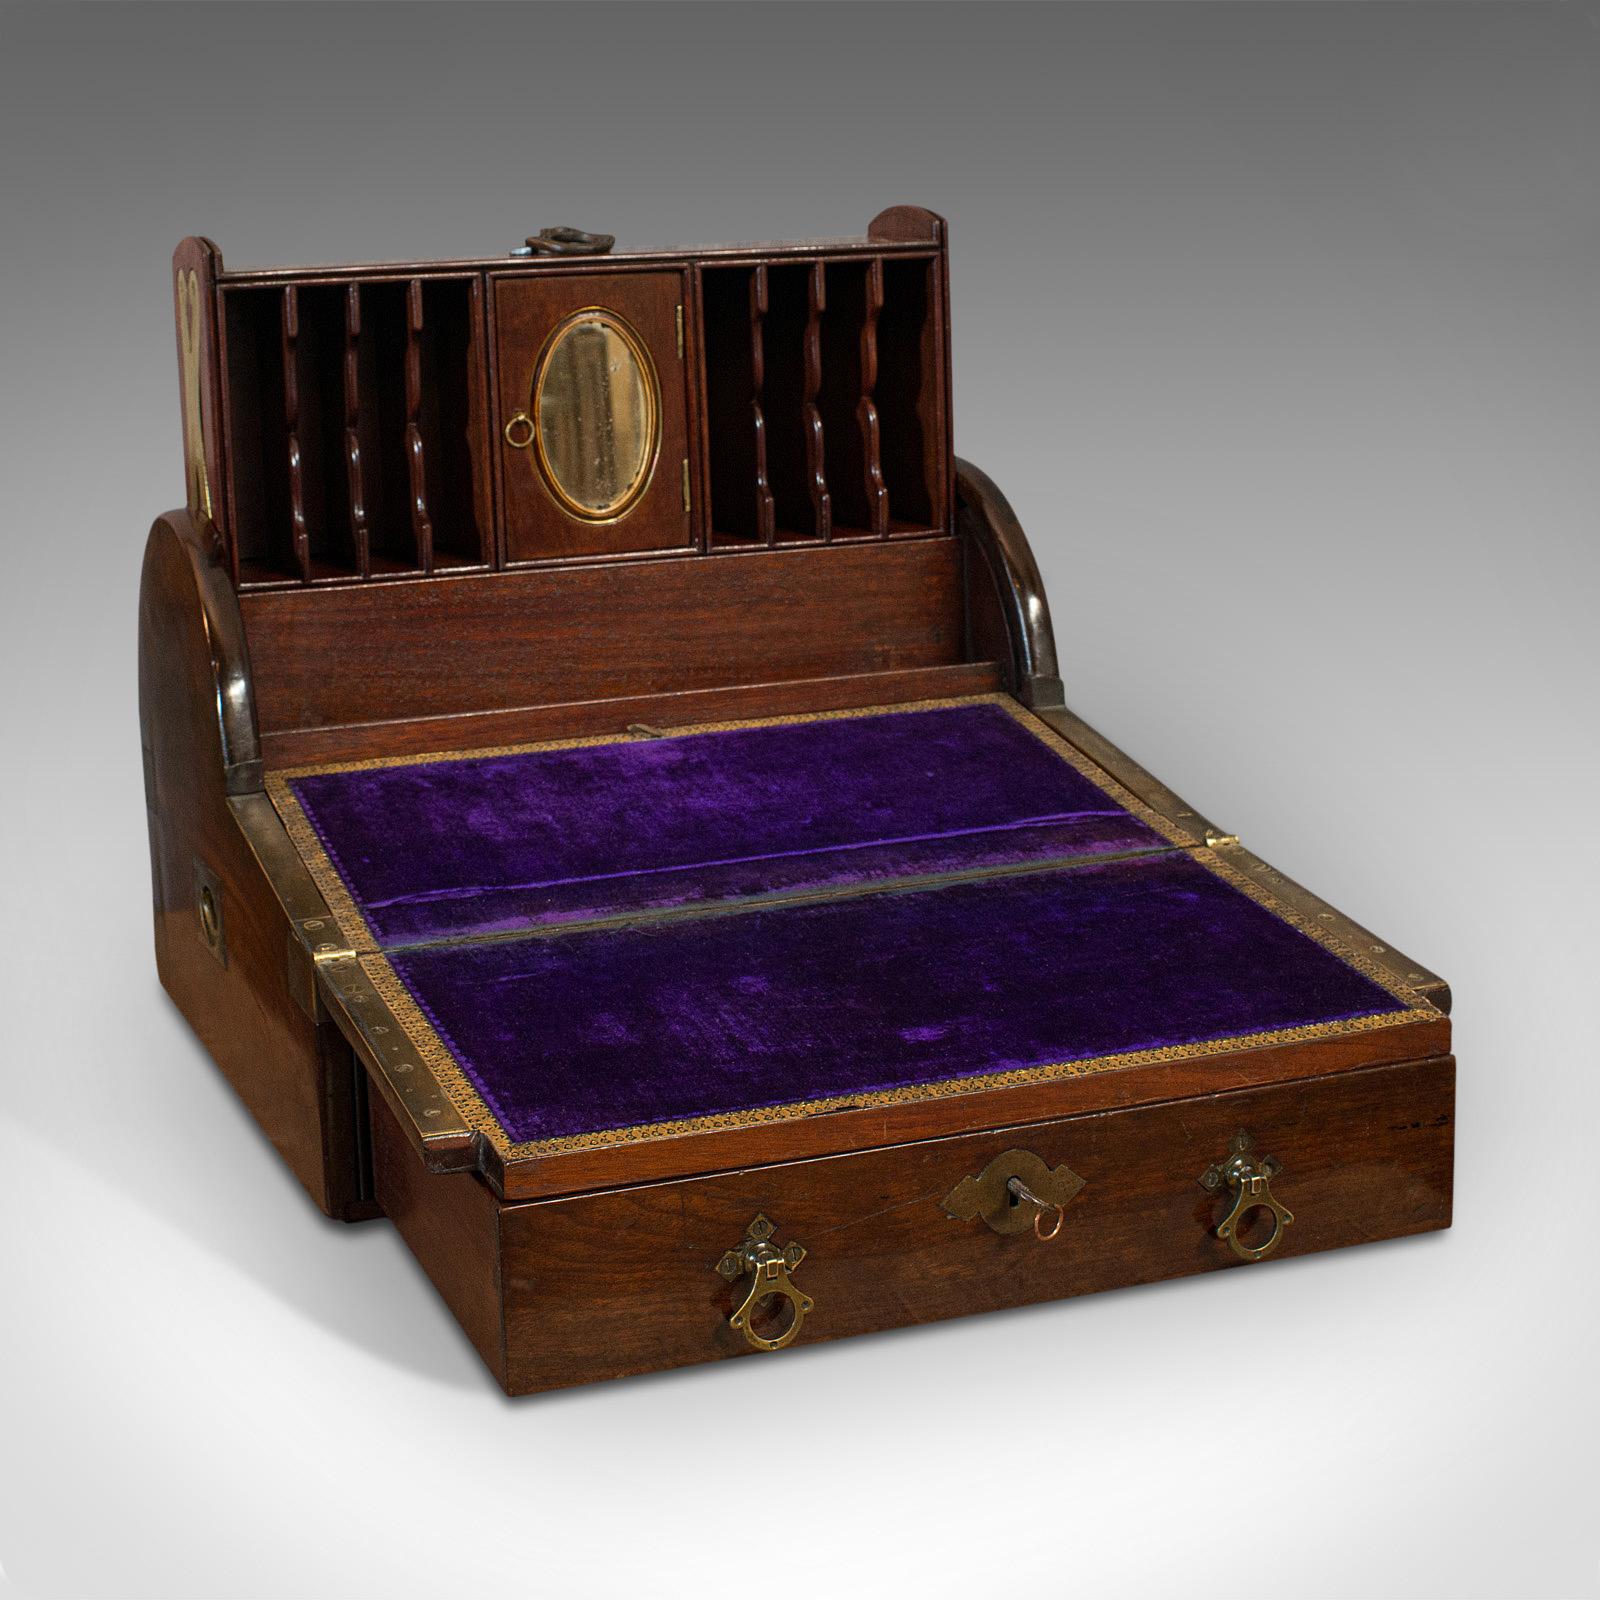 This is an antique campaign writing slope. An English, mahogany ship's captain's correspondence desk, dating to the Victorian period, circa 1850.

Superior campaign piece with captivating roll-top action
Displays a desirable aged patina
Select